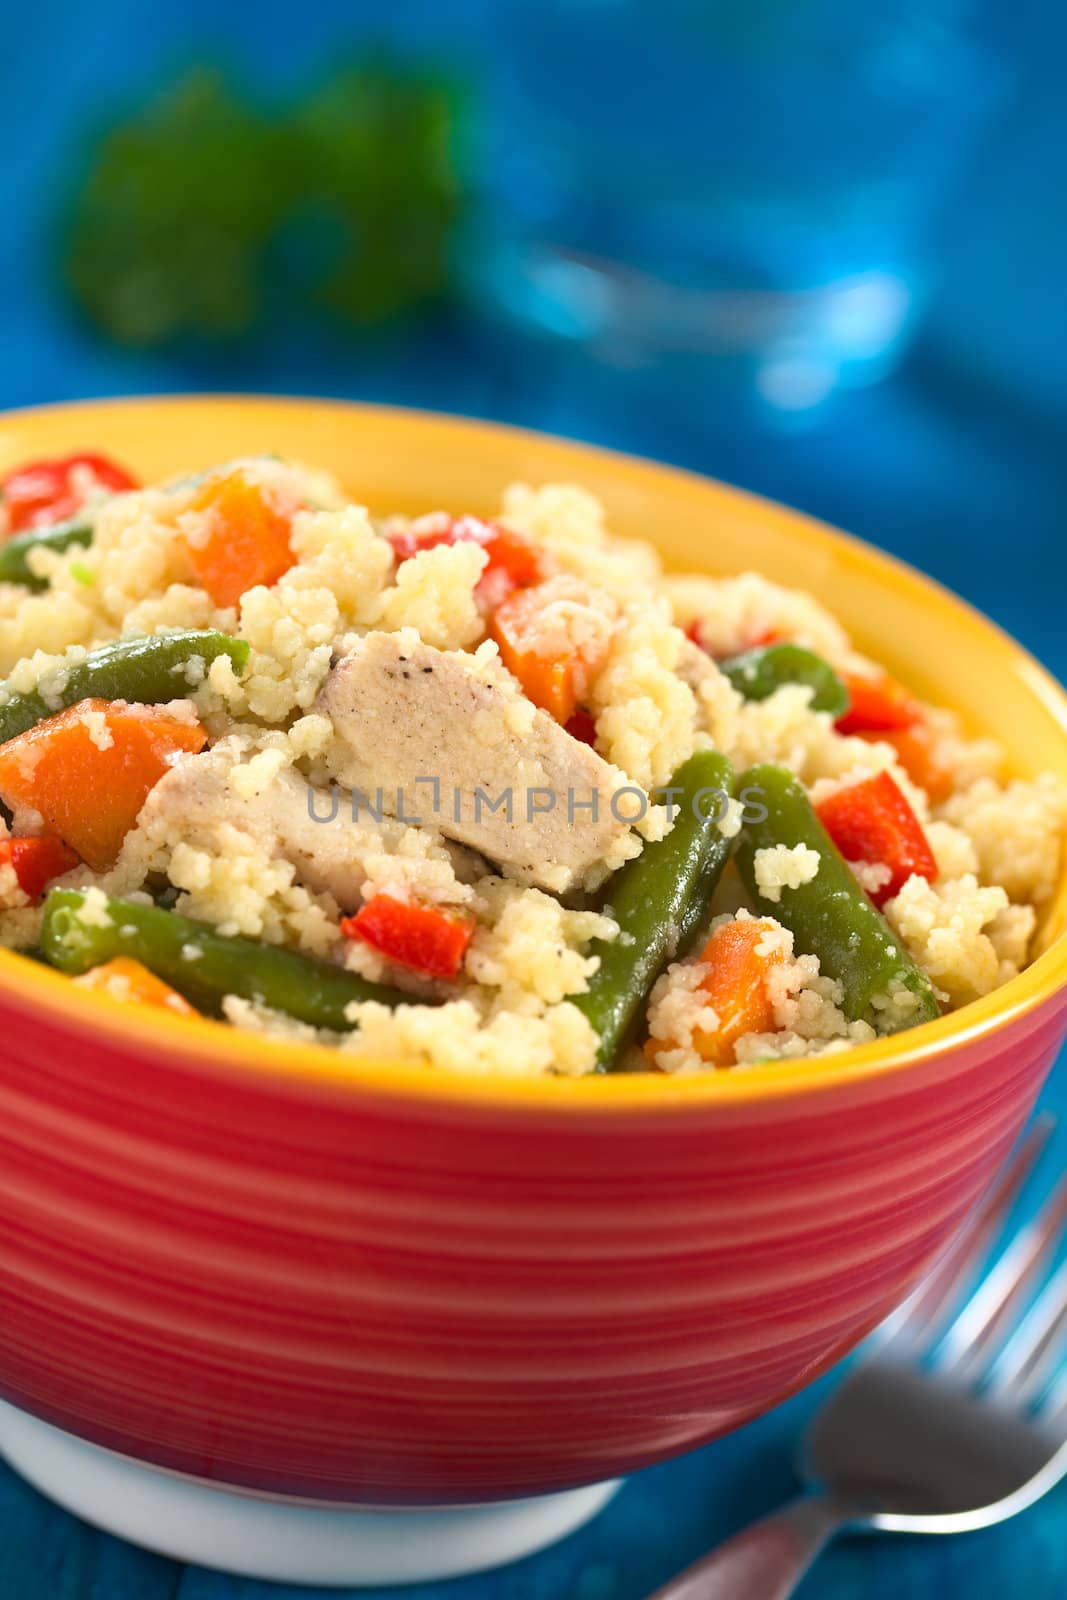 Couscous with Chicken, Green Bean, Carrot and Bell Pepper by ildi